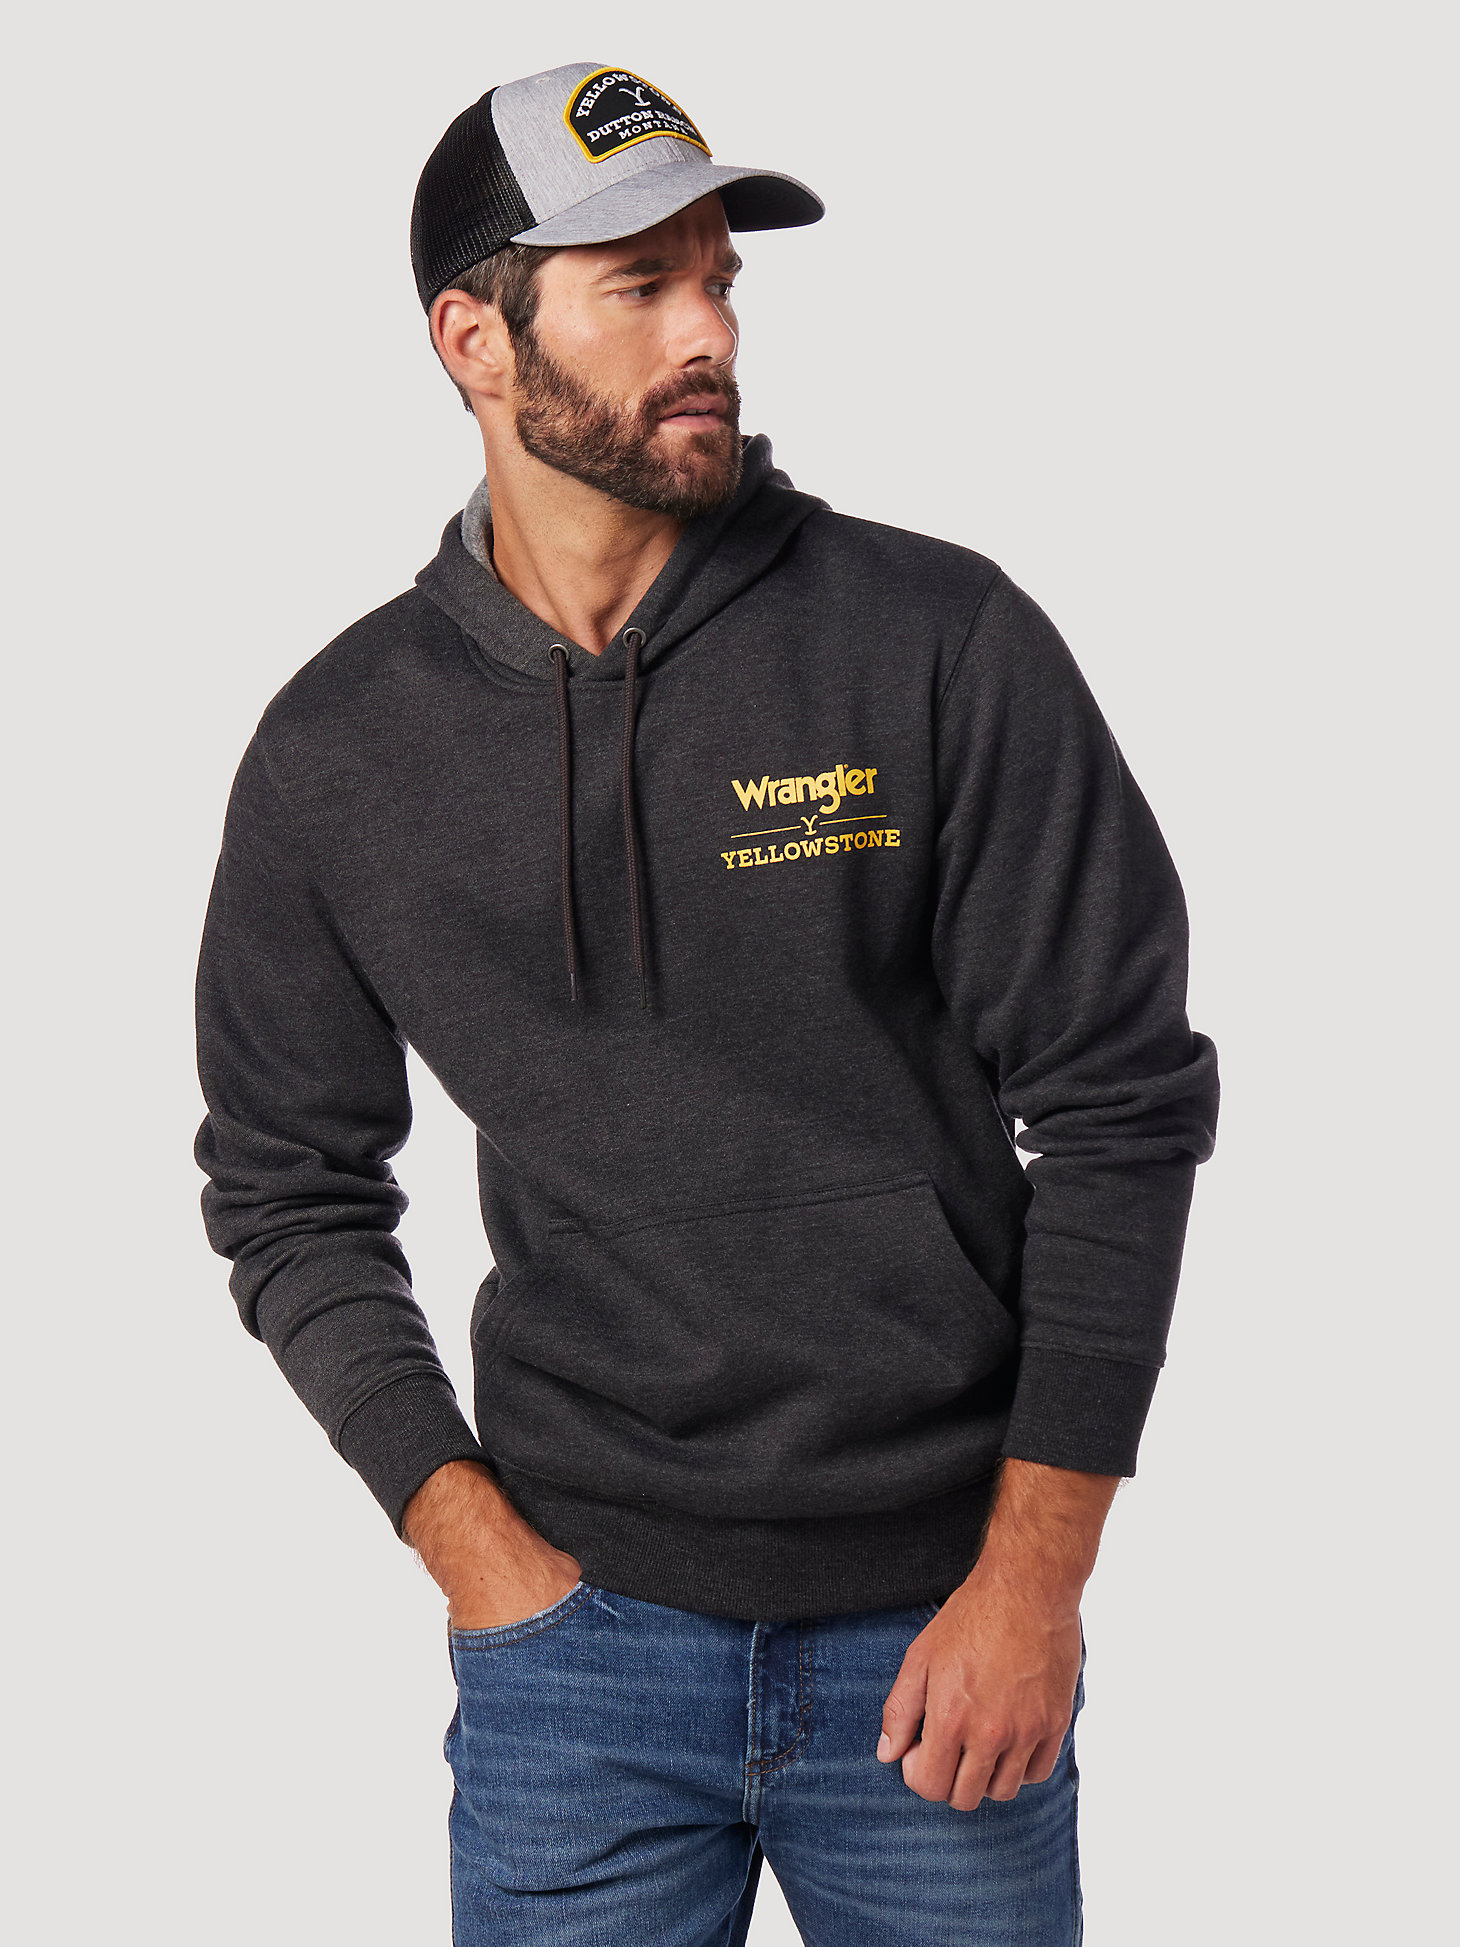 Wrangler x Yellowstone Dutton Ranch Hoodie in Charcoal Heather main view